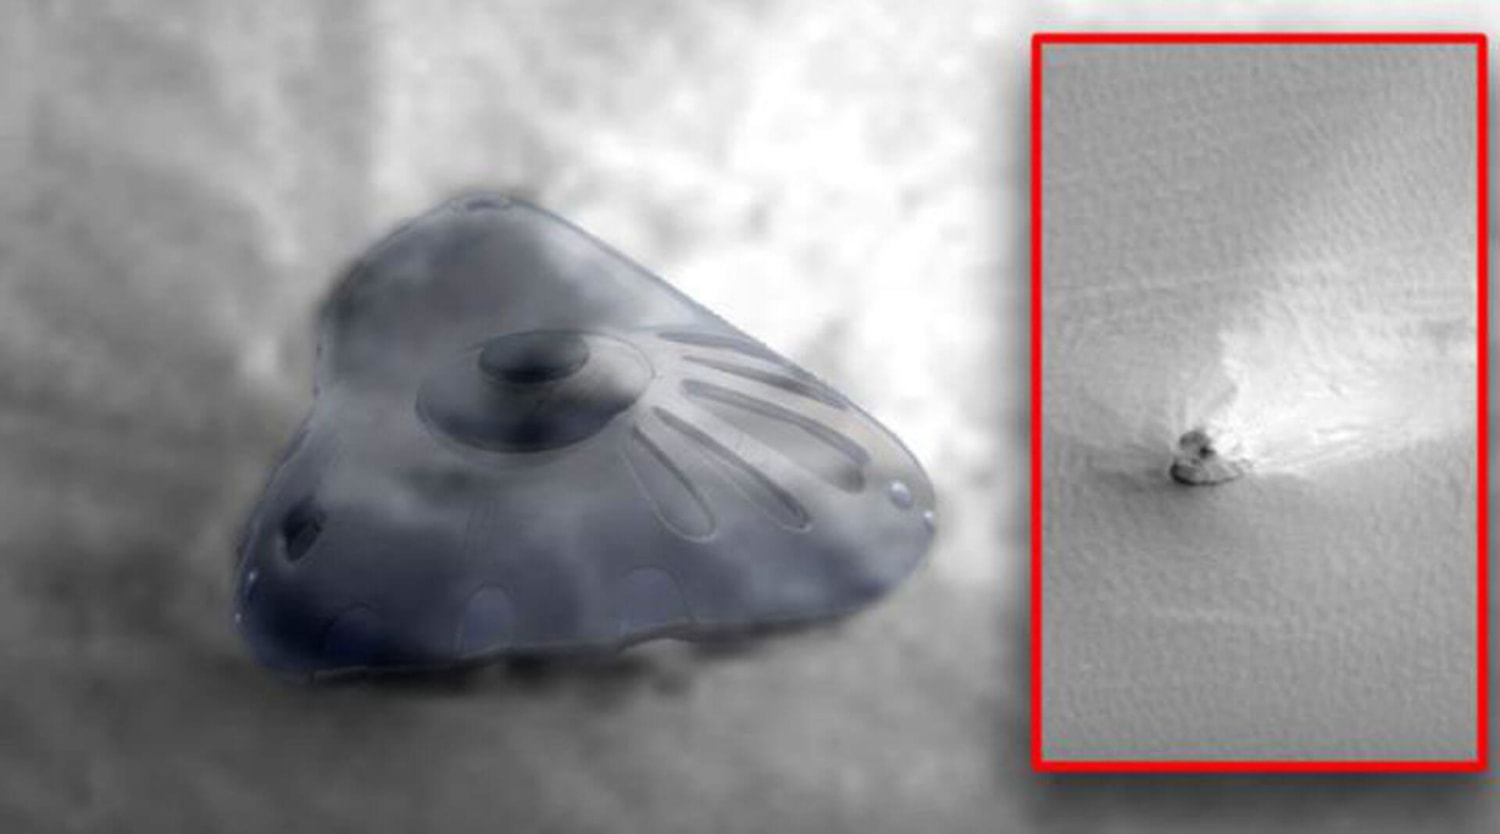 600-FOOT-WIDE, INTACT-LOOKING UFO SPOTTED ON MARS COULD STILL FLY, SPECIALISTS CLAIM